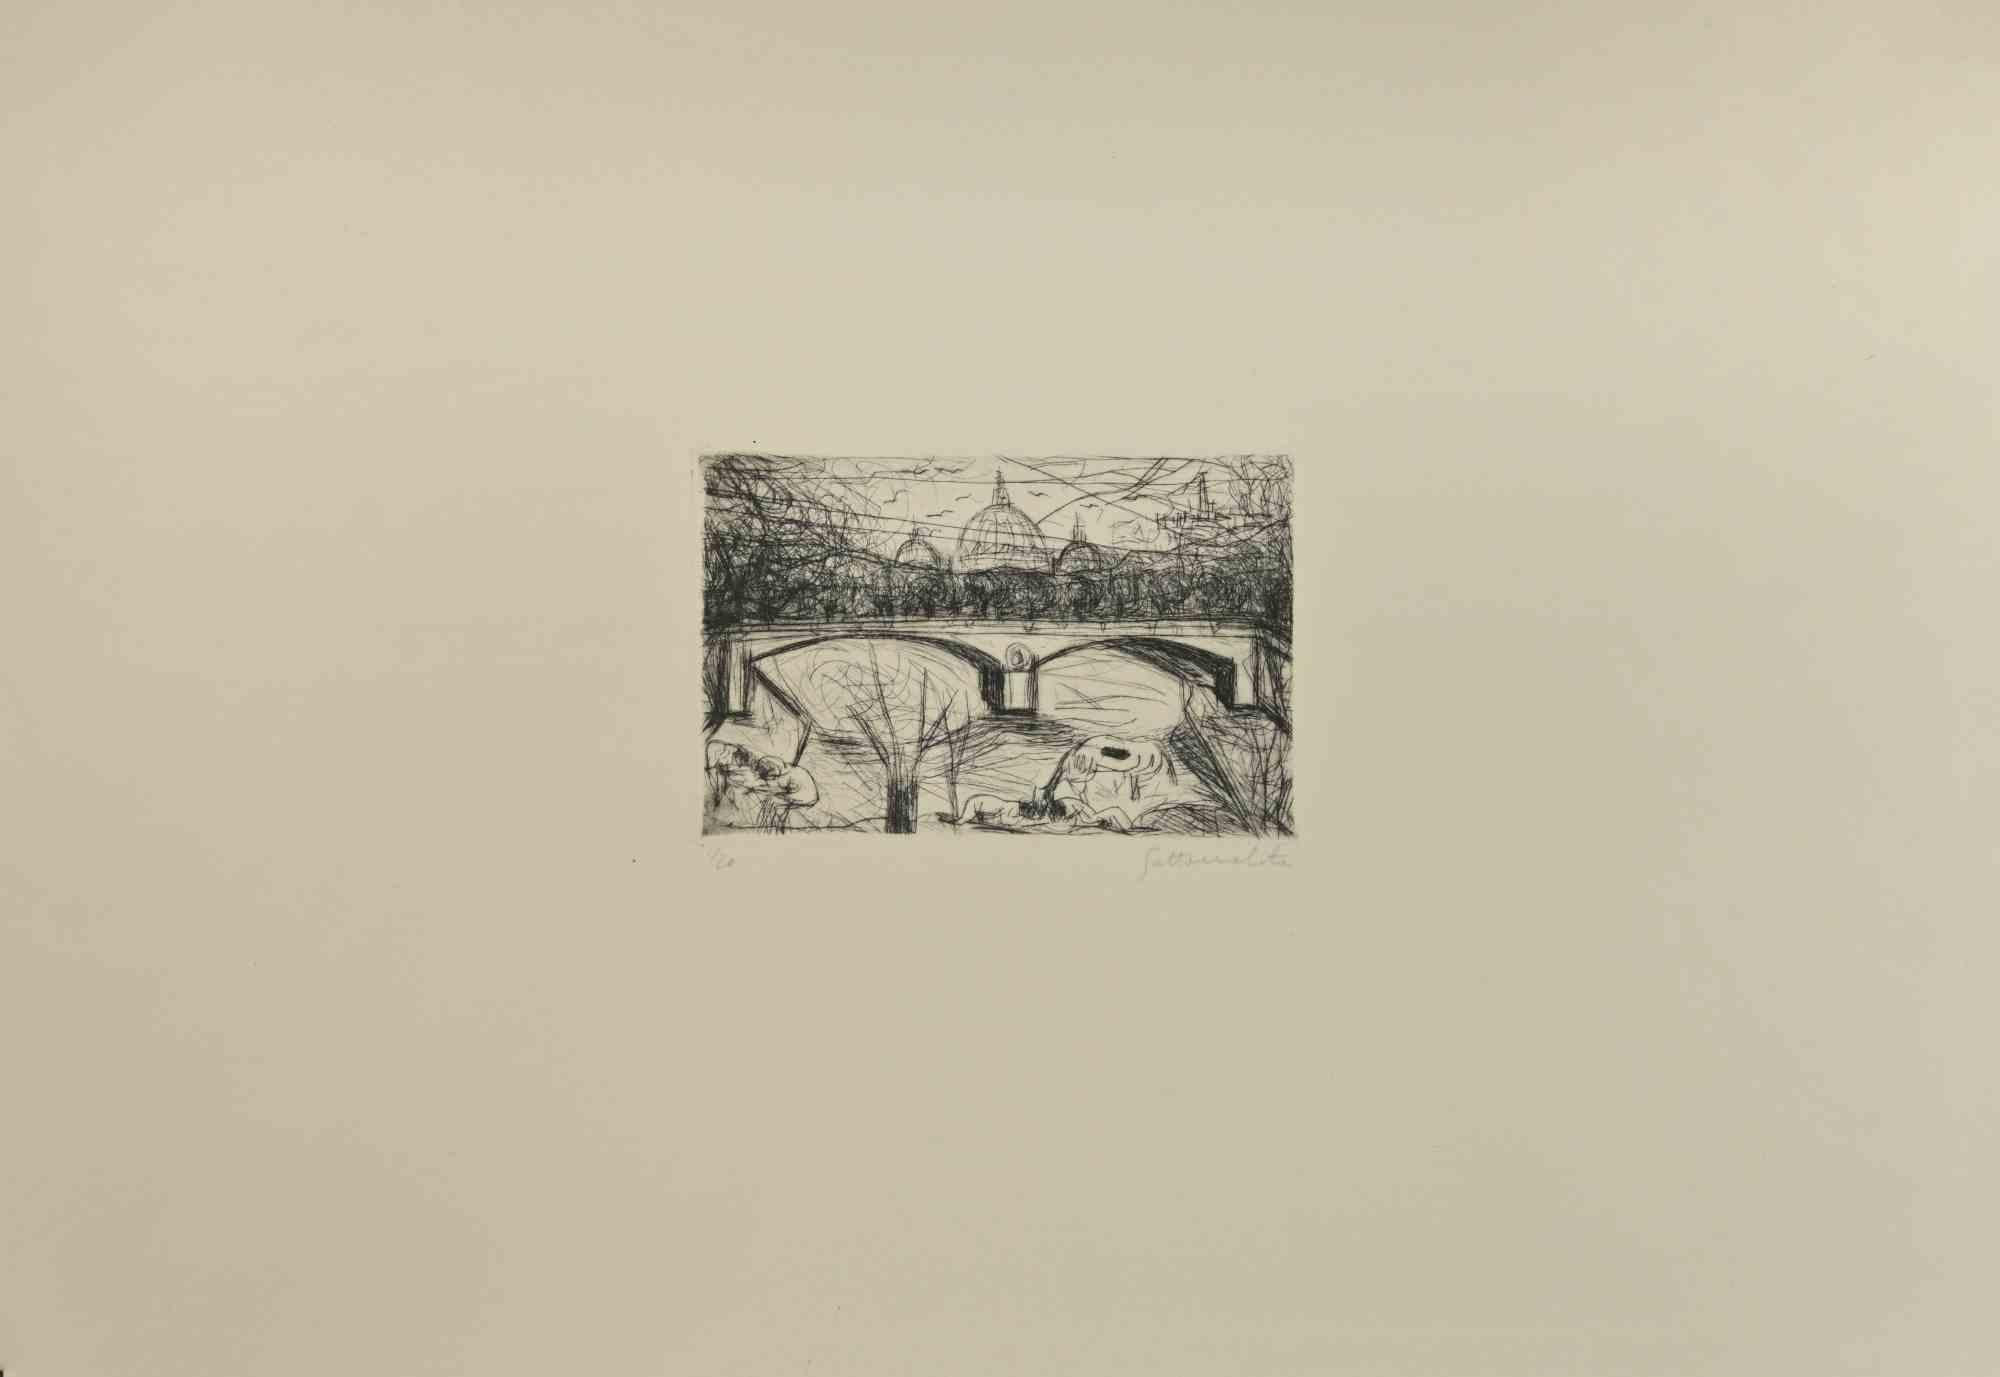 The View of St. Peter and Tiber in Rome - Etching by Nazareno Gattamela - 1985